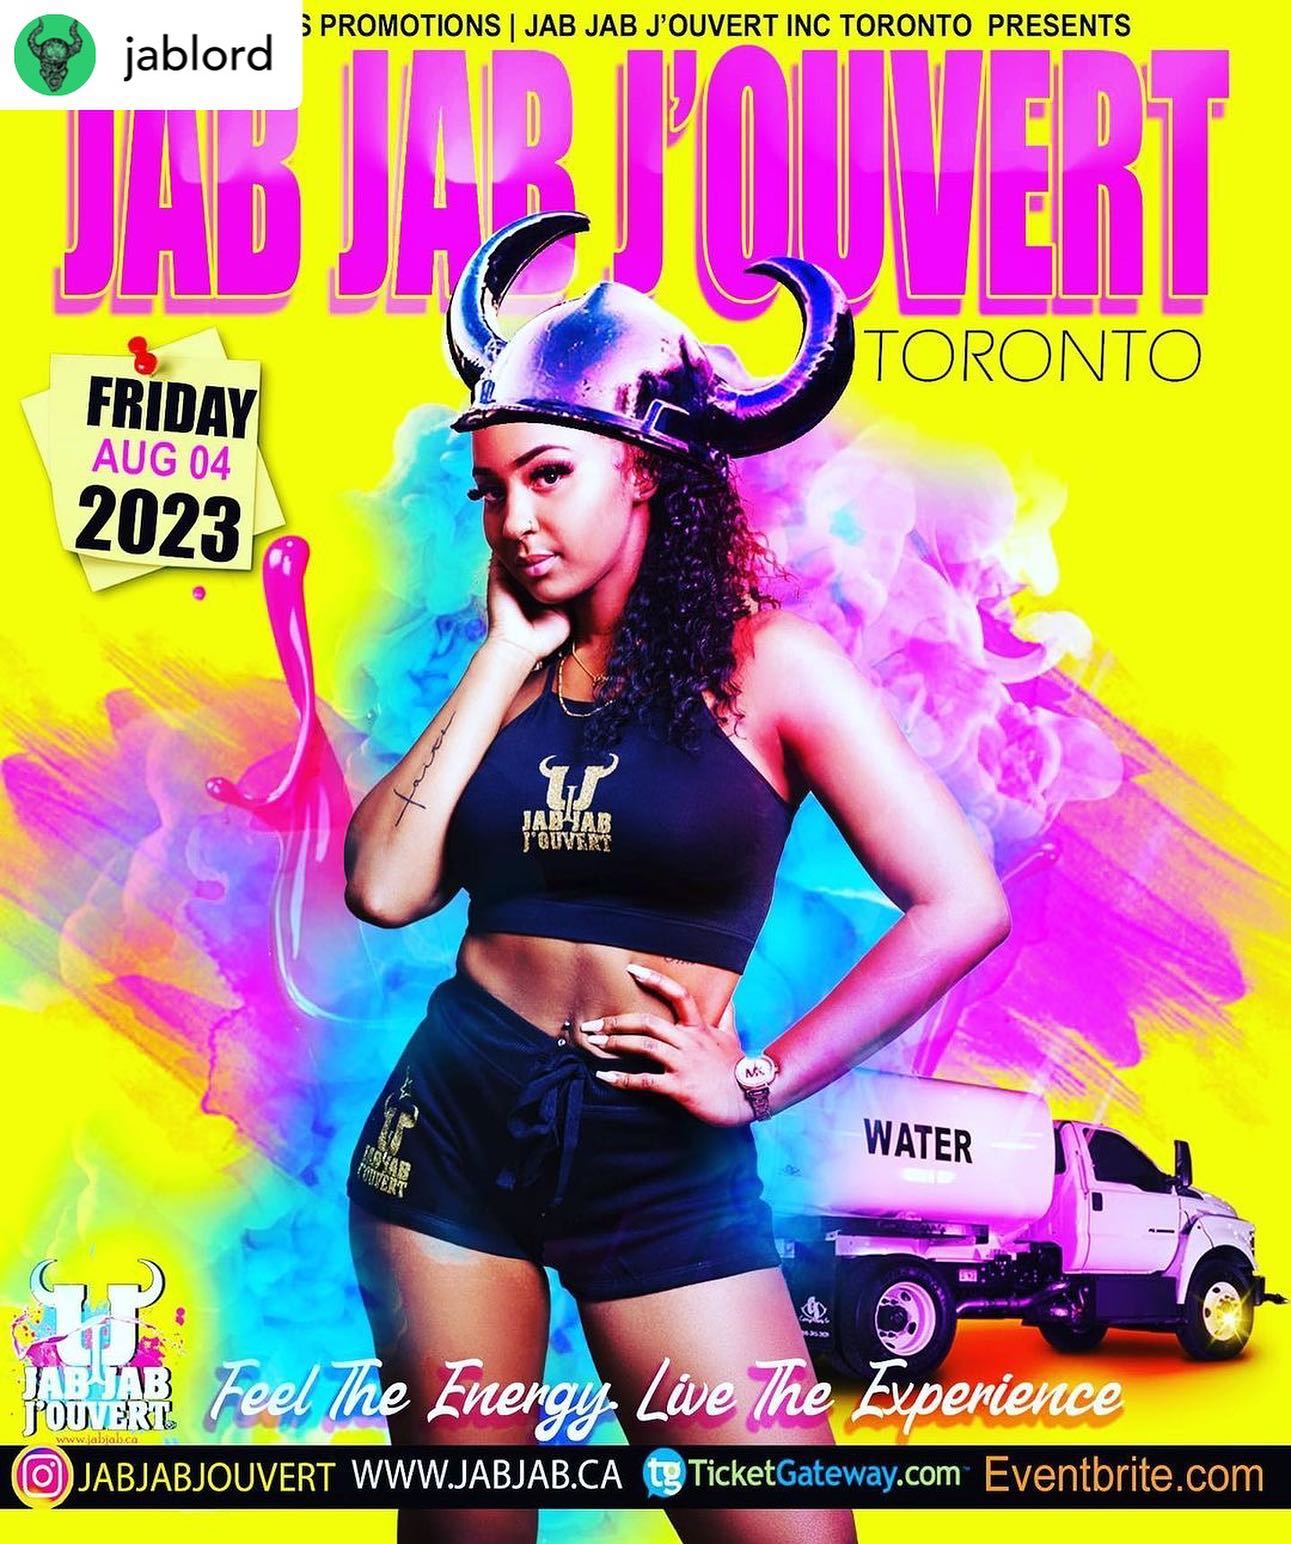 The Official Jab Jab J'Ouvert 2023 returns.

Toronto Caribbean Caribana Carnival Weekend
🥁 Friday August 4, 2023 

More Mass, More Paint, More Water, More Music, More Fun!  
Come out and Celebrate the Culture of Jab Jab

🎟 Early Bird Tickets on Sale Starting March 1st, 2023 

www.eventbrite.com
Or www.ticketgateway.com 

Call / Text 647-551-9060 | 416-206-3959 
#gotocarnival  #jouvert 